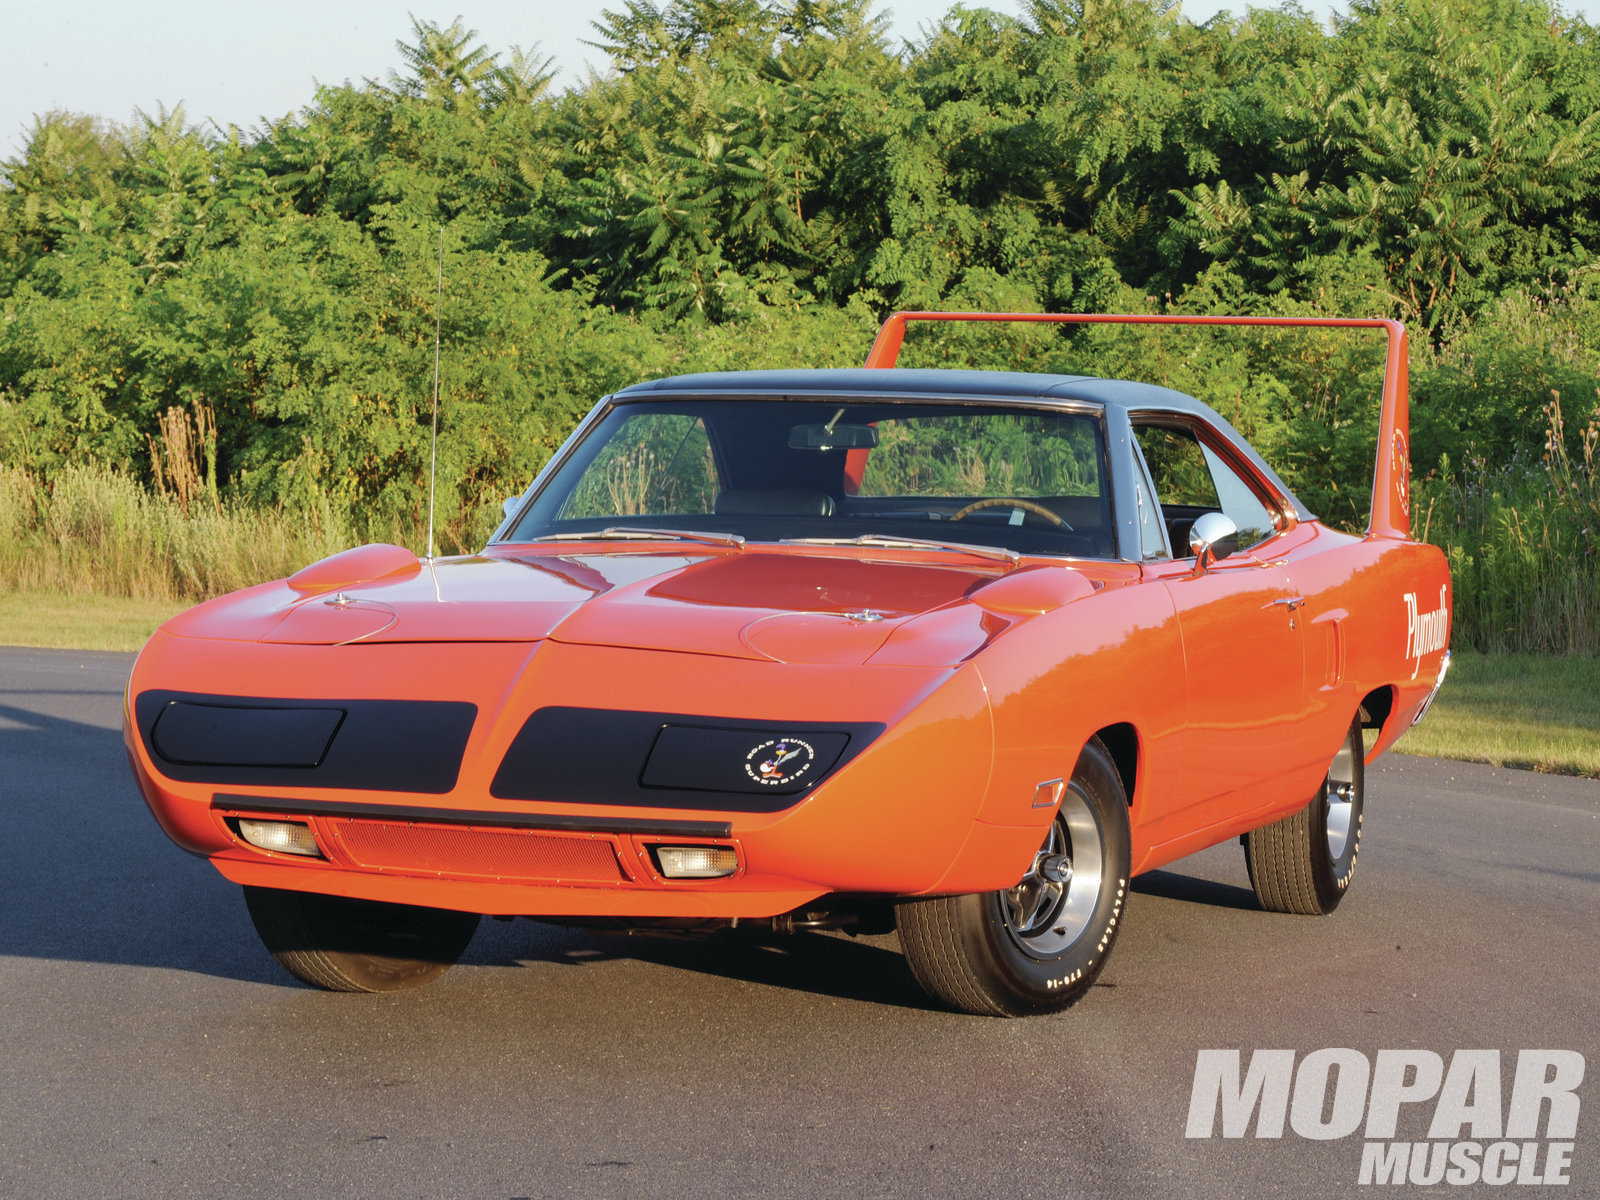 HQ 1970 Plymouth Superbird Wallpapers | File 592.93Kb